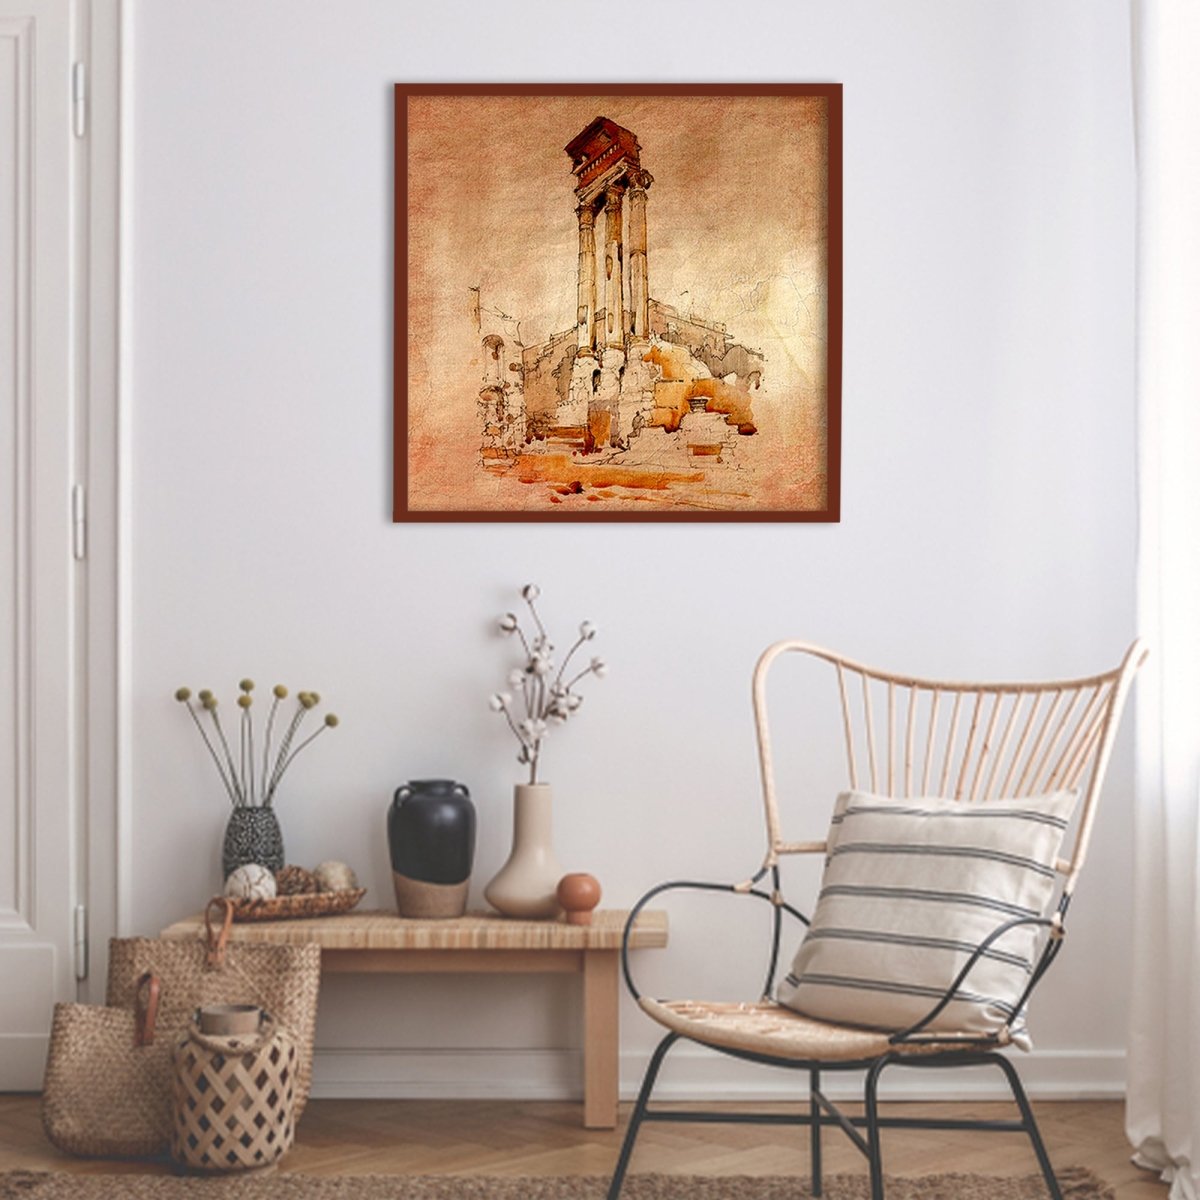 Above Bed Decor: Transform Your Space with our Large Digital Watercolor Prints - Modern Wall Art - Zeinnas